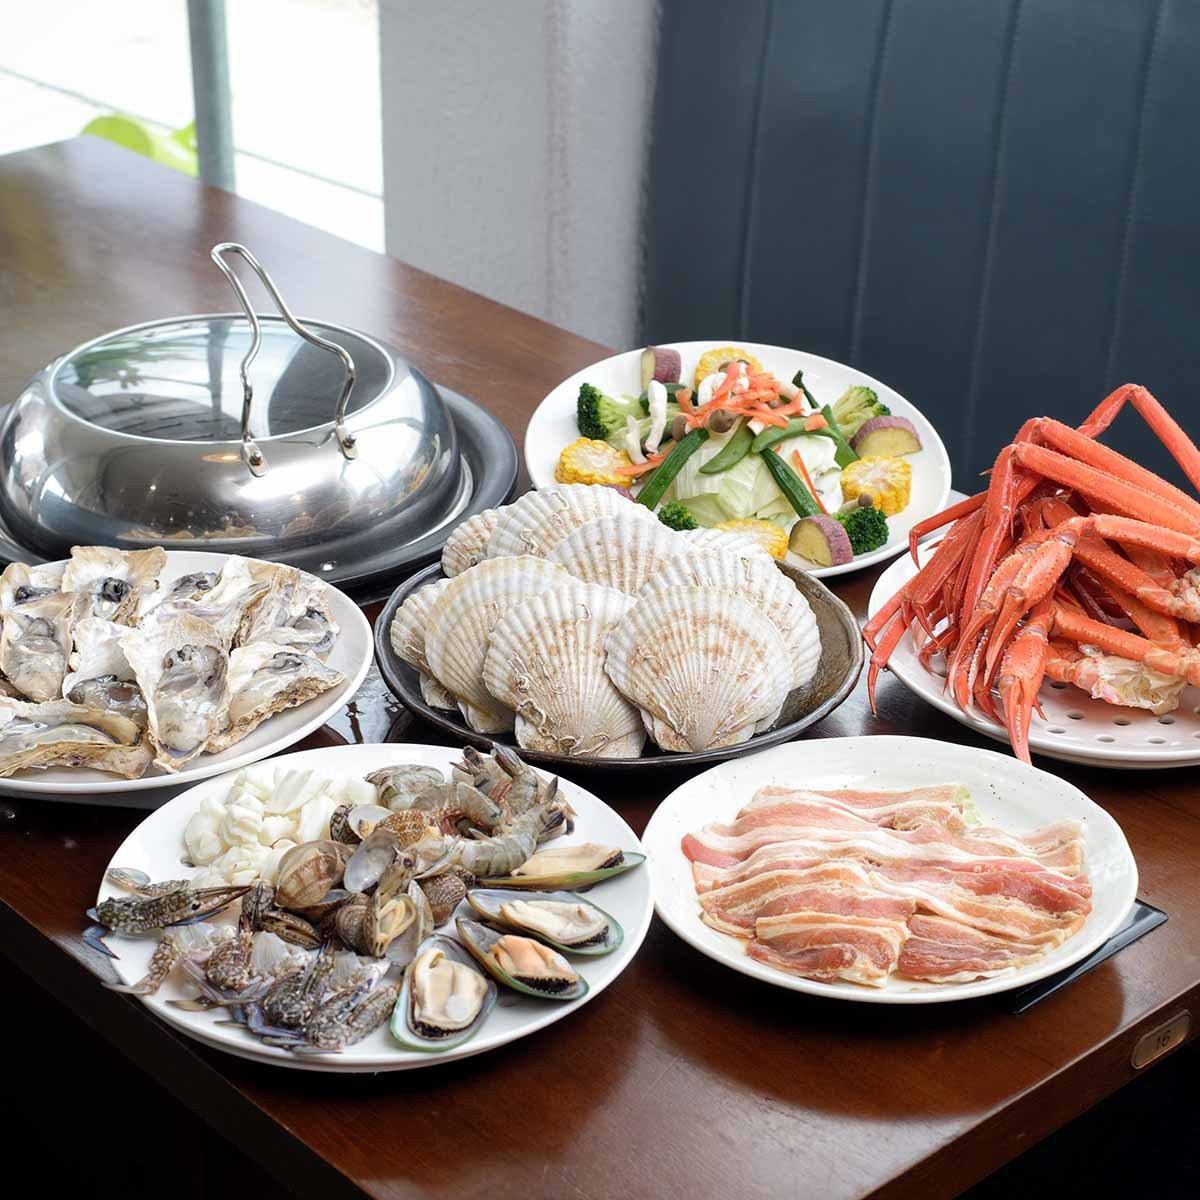 There is an all-you-can-eat course using fresh seafood!